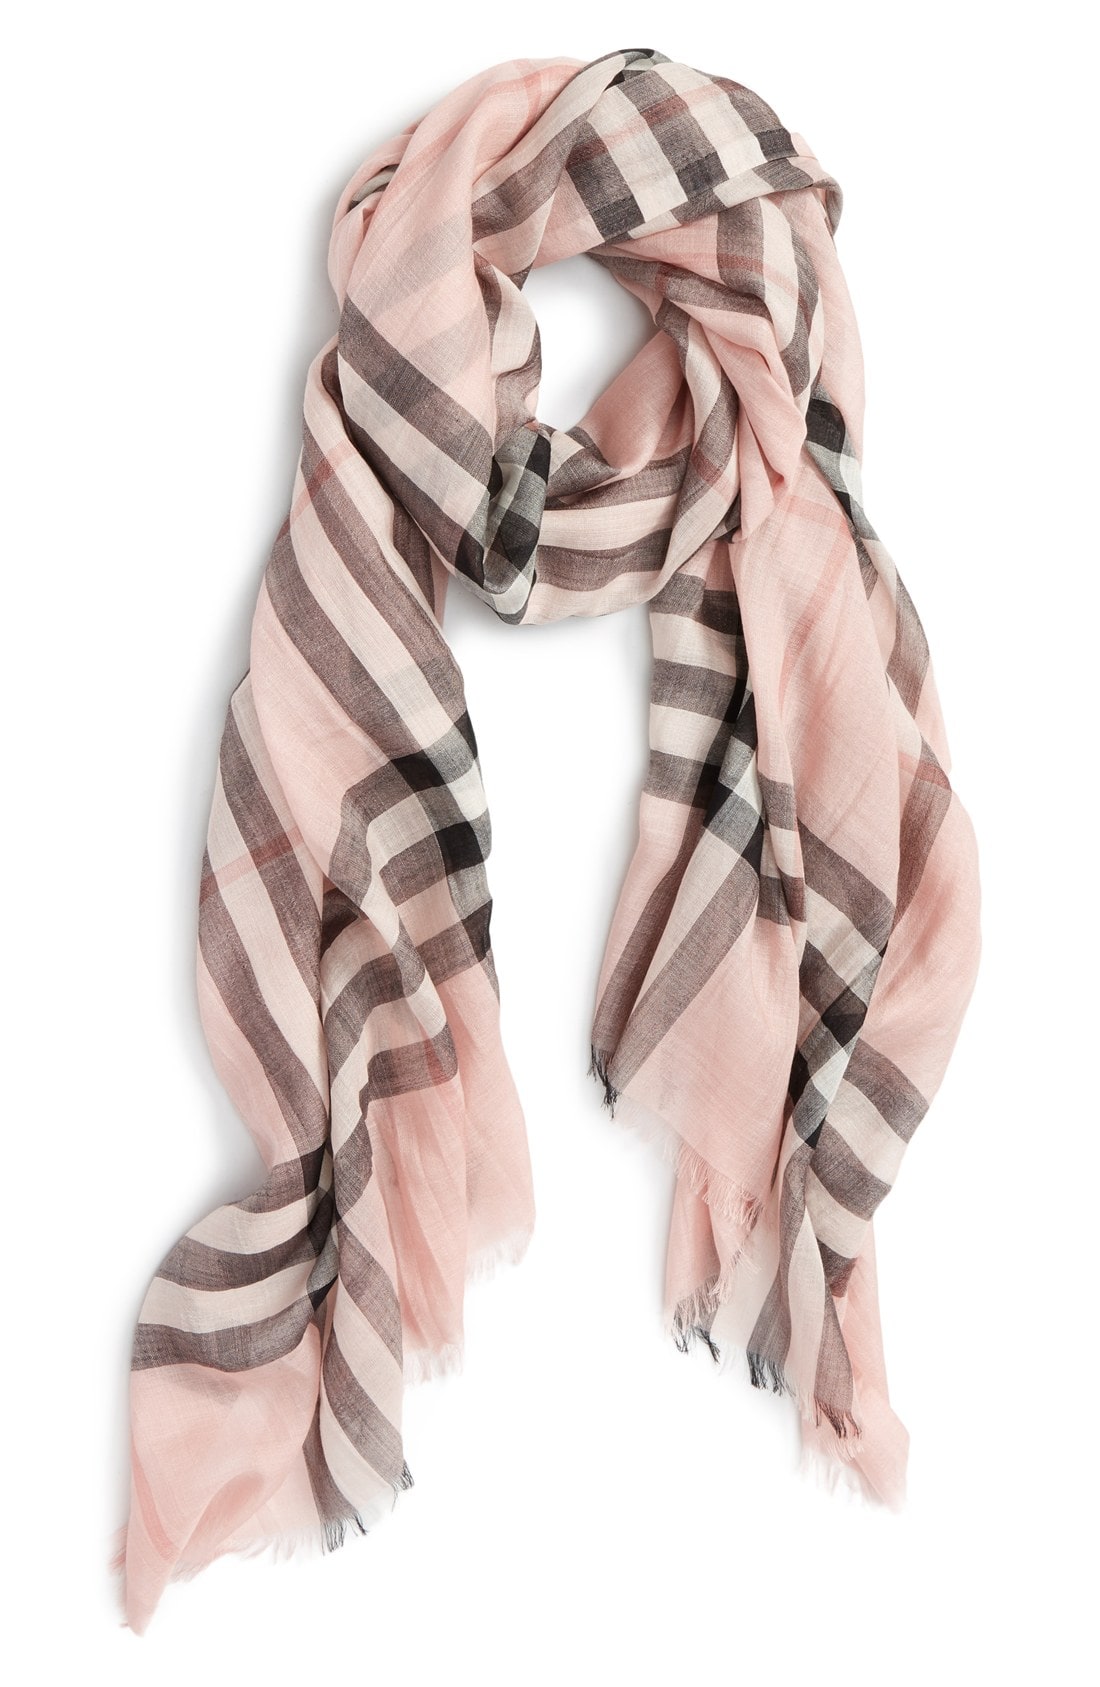 With the scarf in pink simple outfits beautify feminine